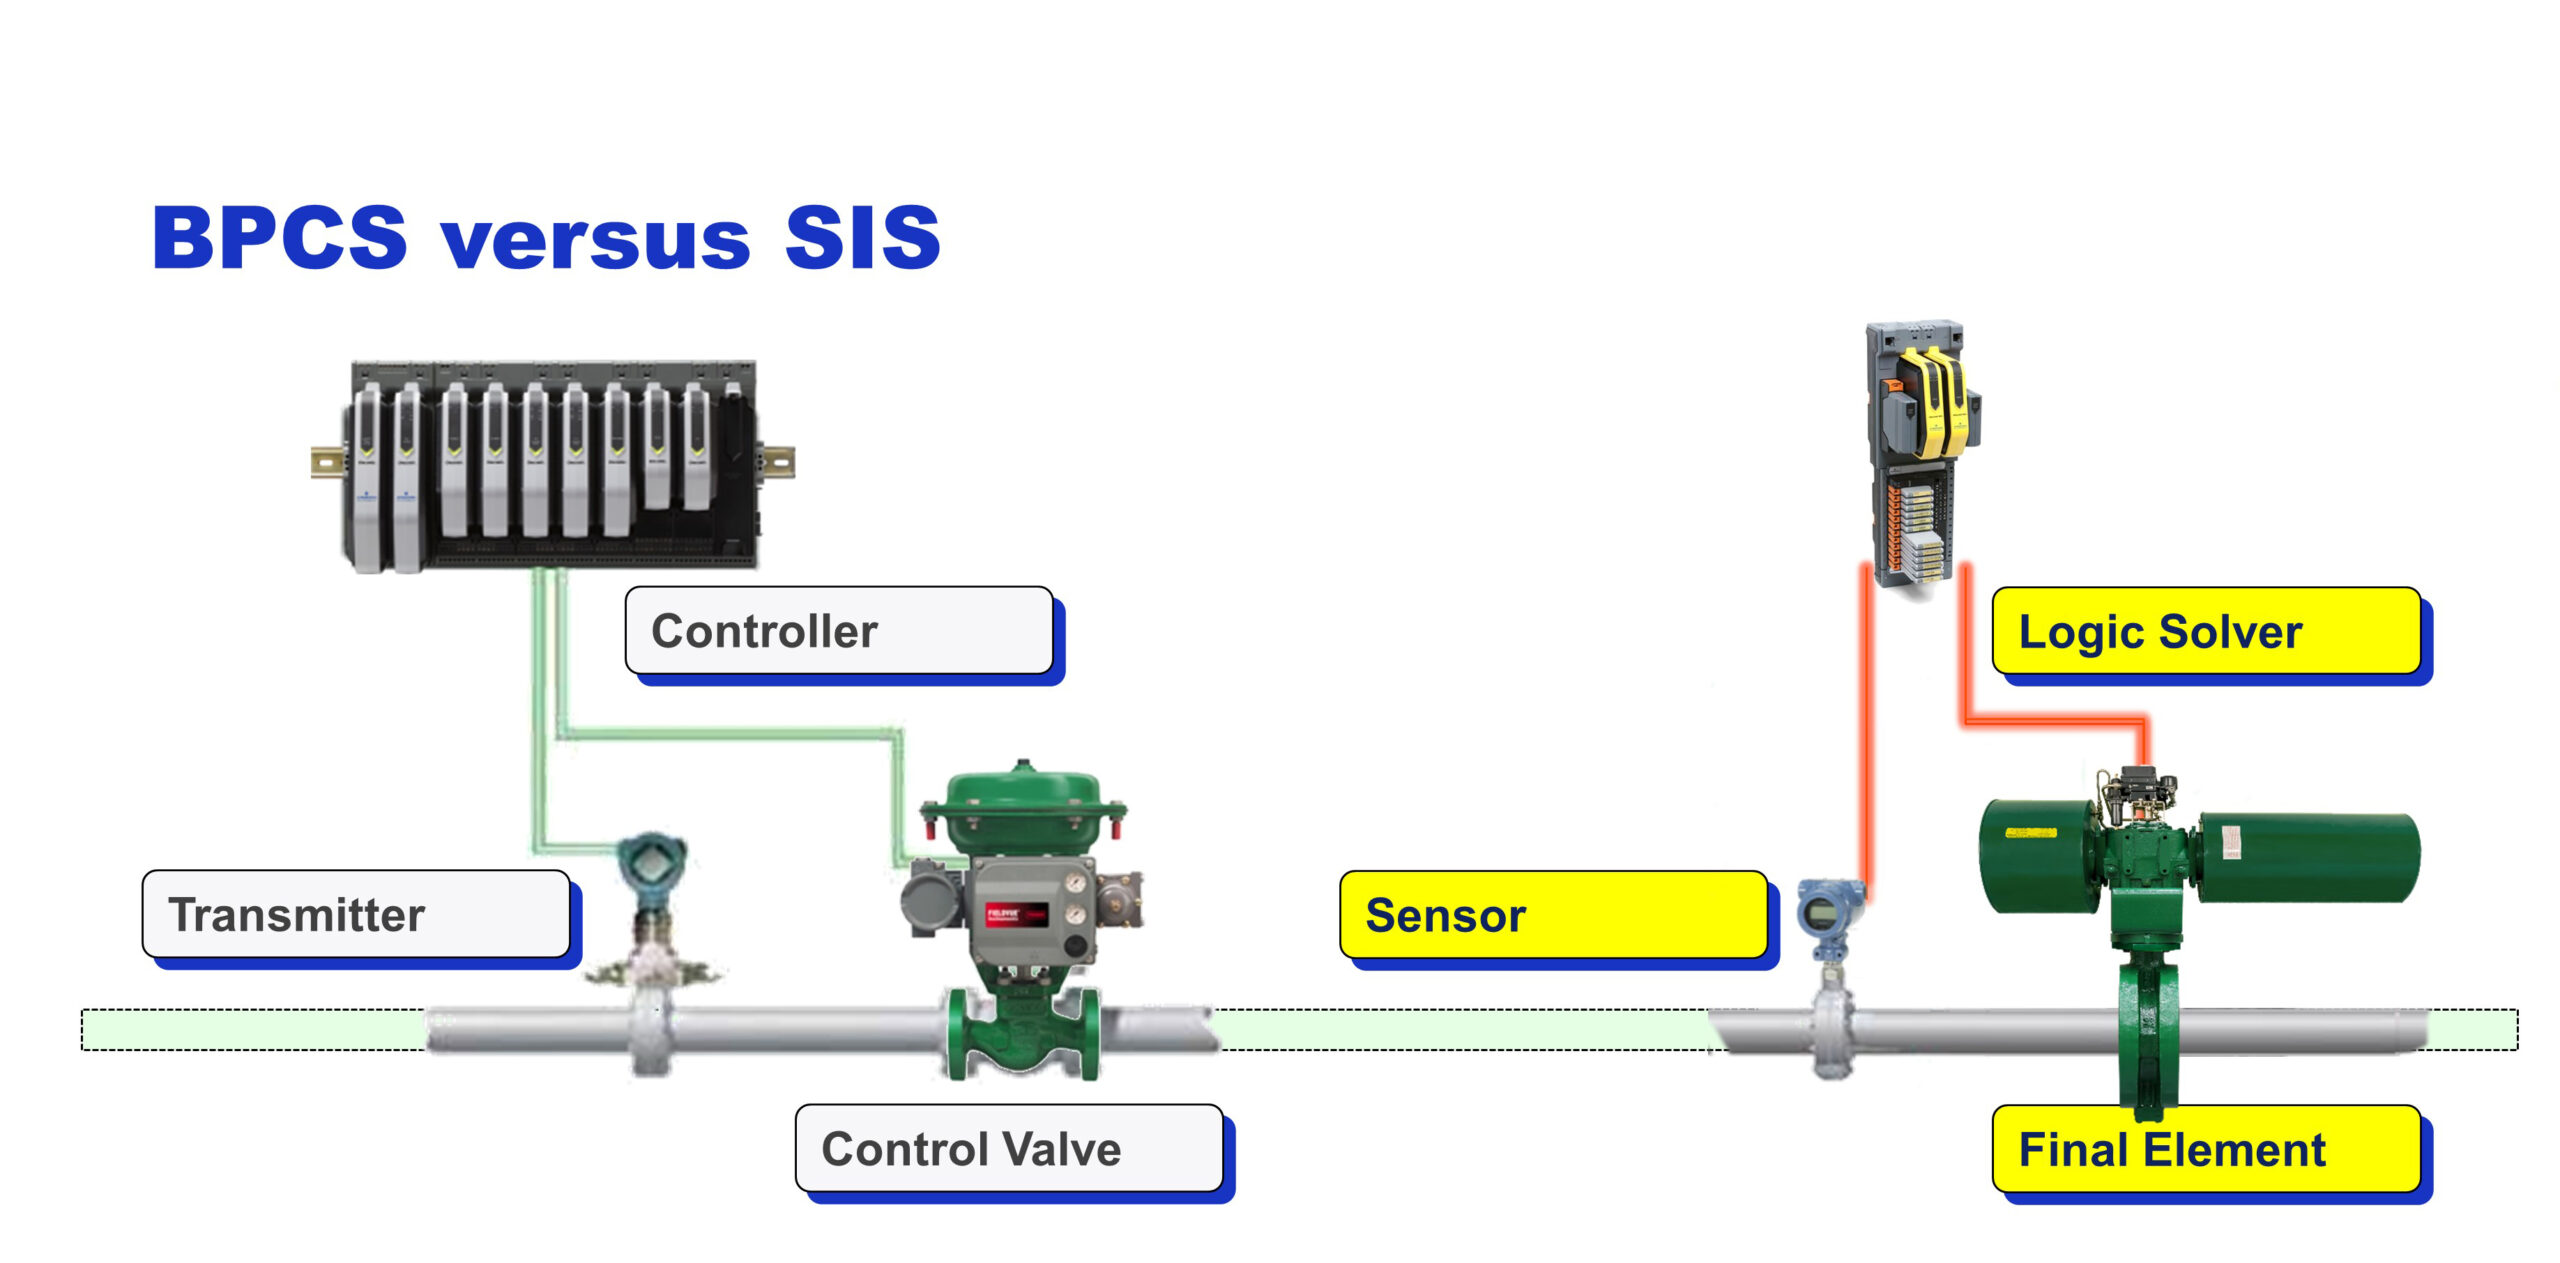 Basic Process Control Systems (BPCS) vs. Safety Instrumented System (SIS)